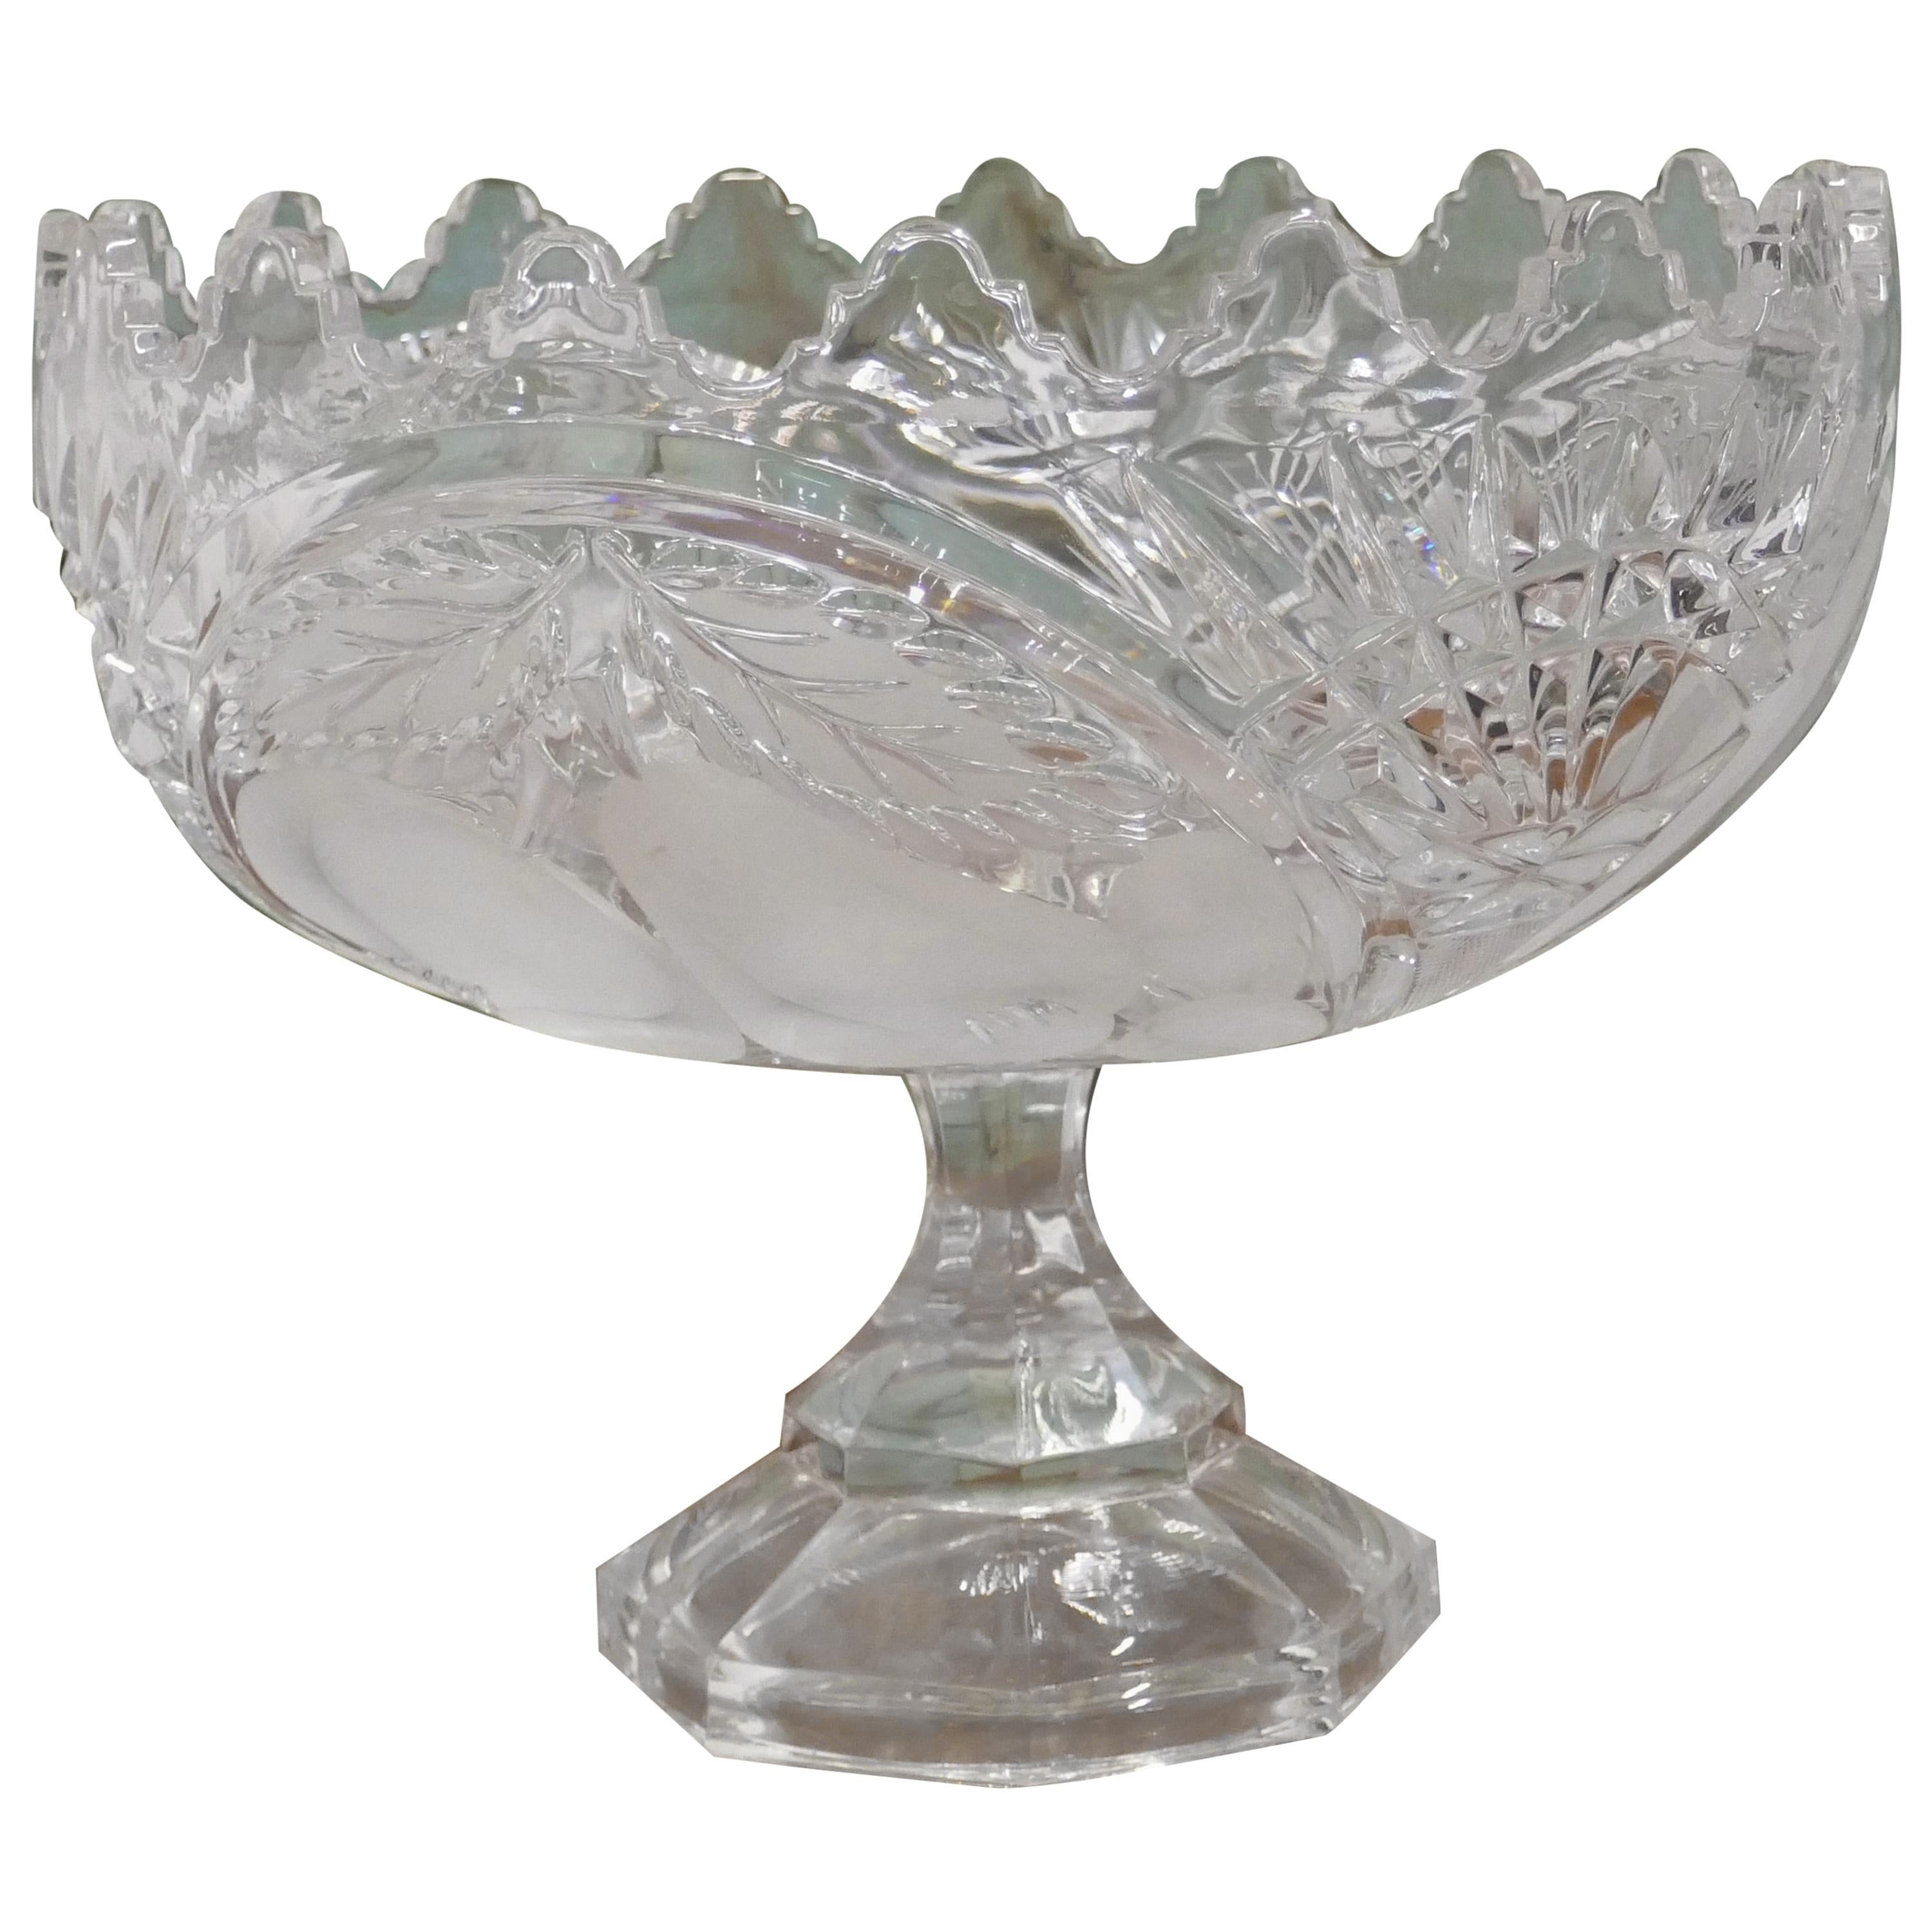 Large French Tazza Etched Cristal Pedestal Fruit Dish